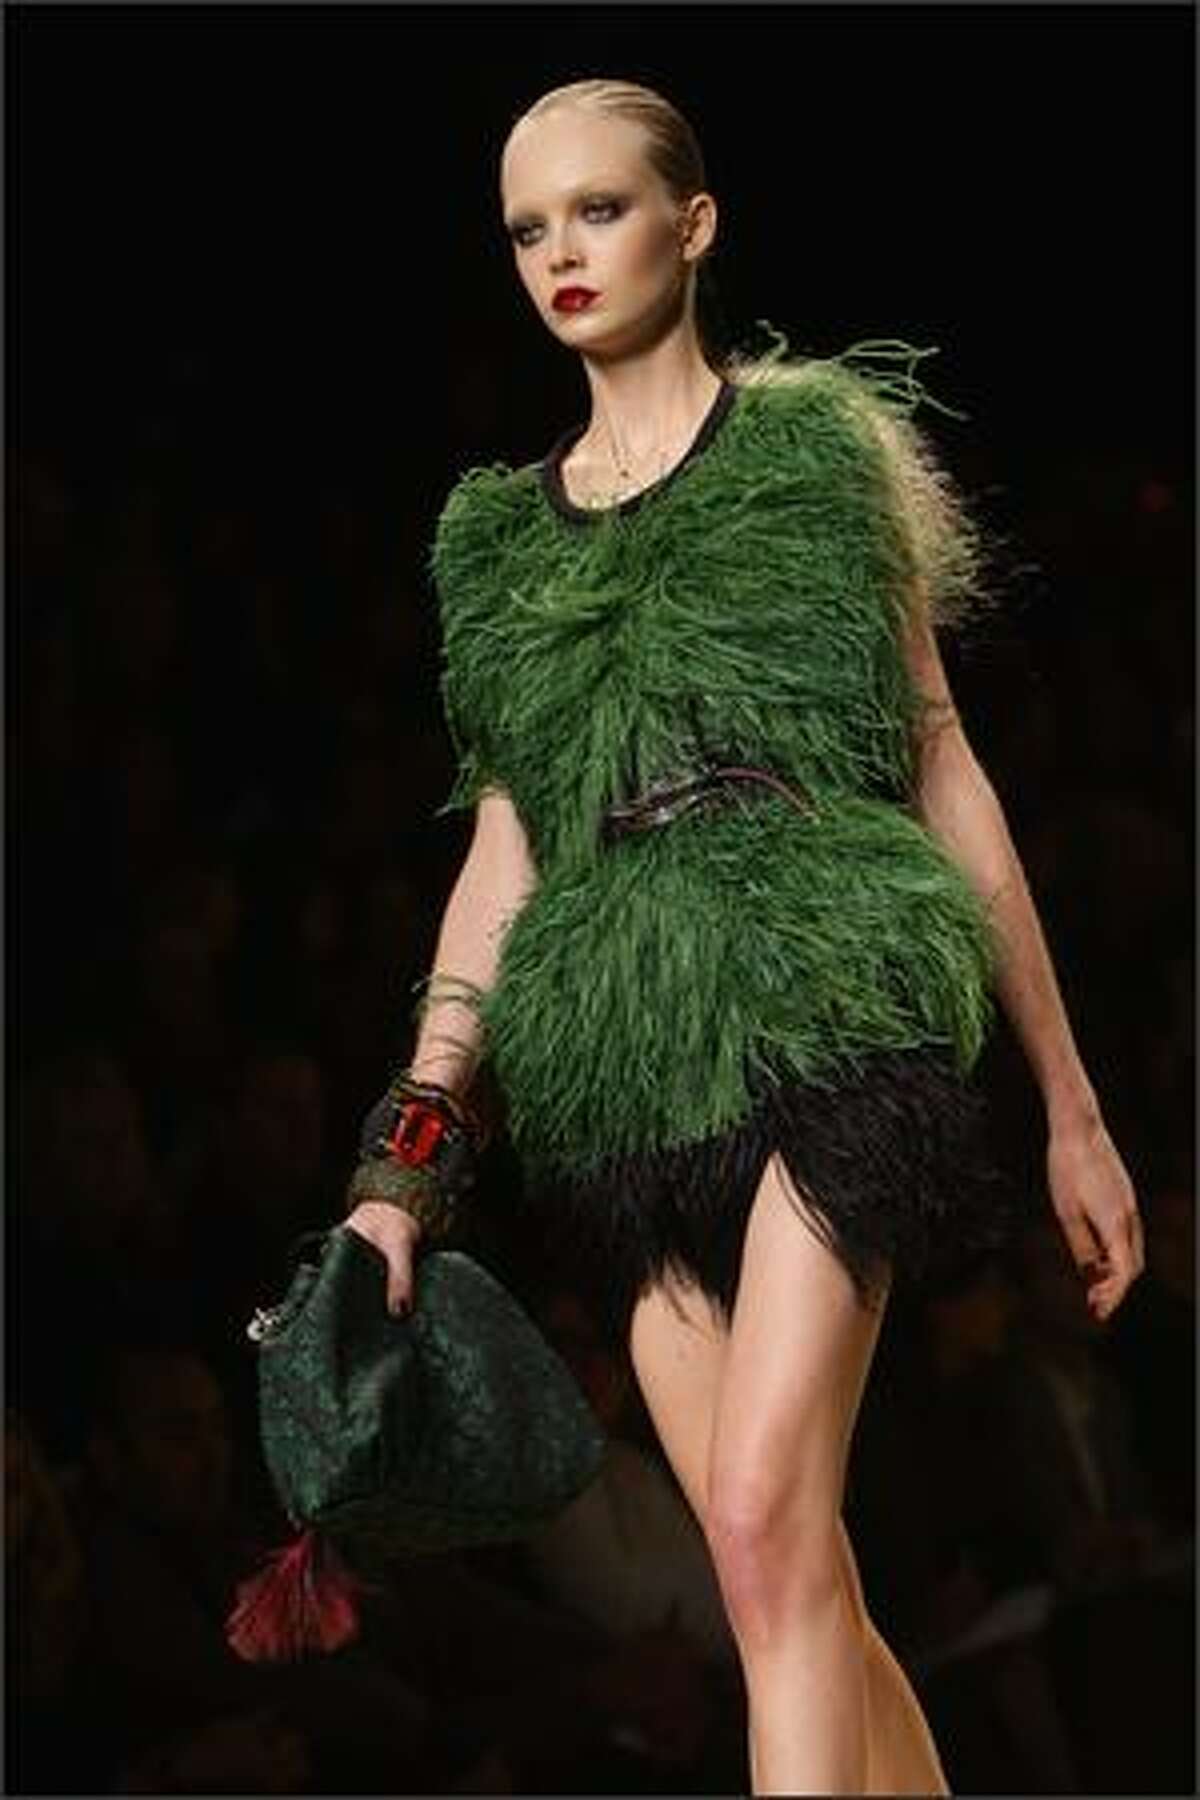 A model presents a creation by designer Marc Jacobs for Louis Vuitton during Paris Fashion Week on Sunday in Paris.